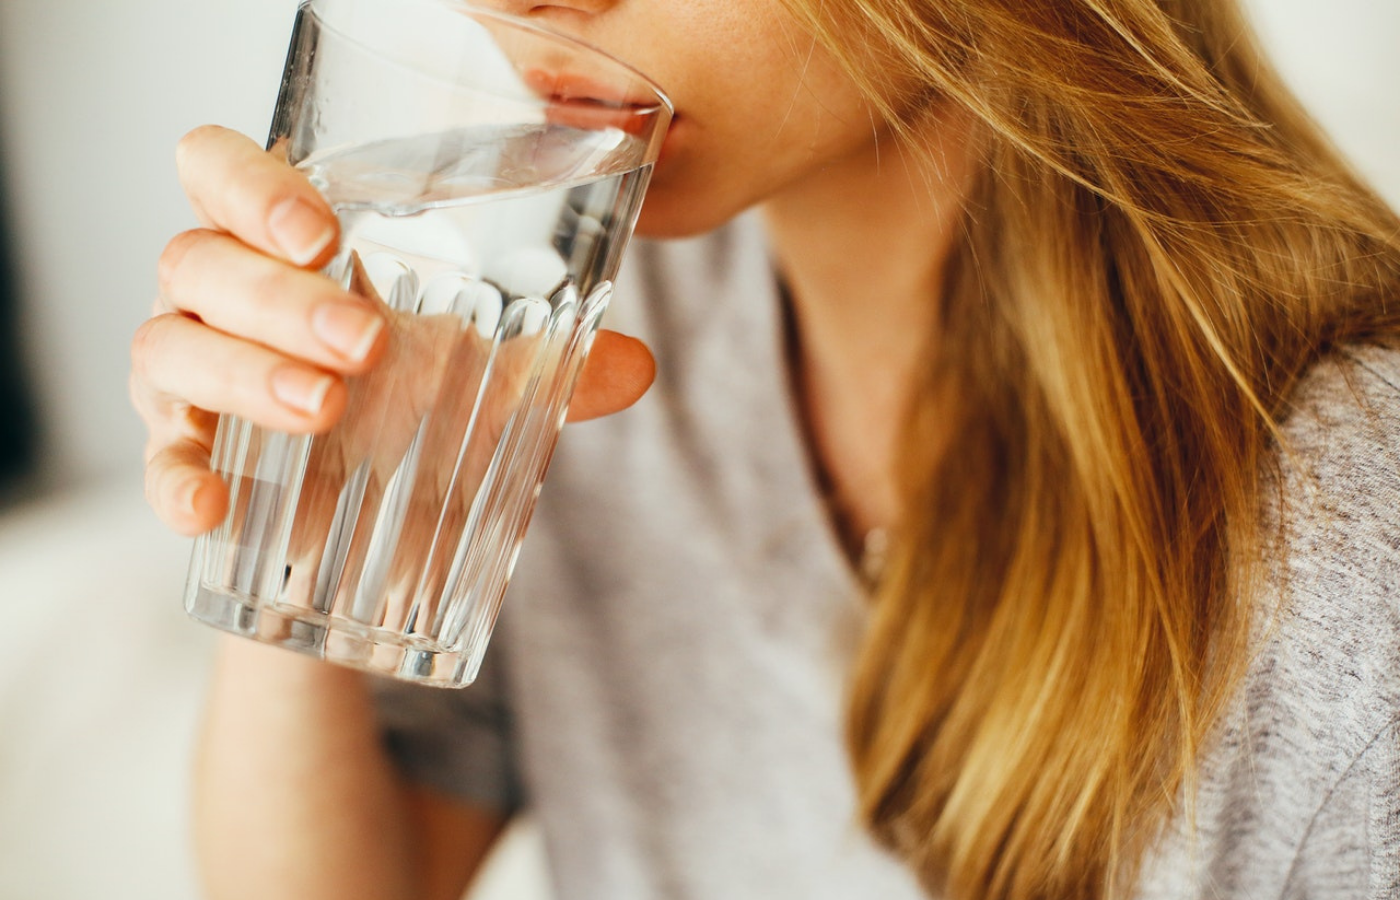 How Not Drinking Enough Water Affects Your Health